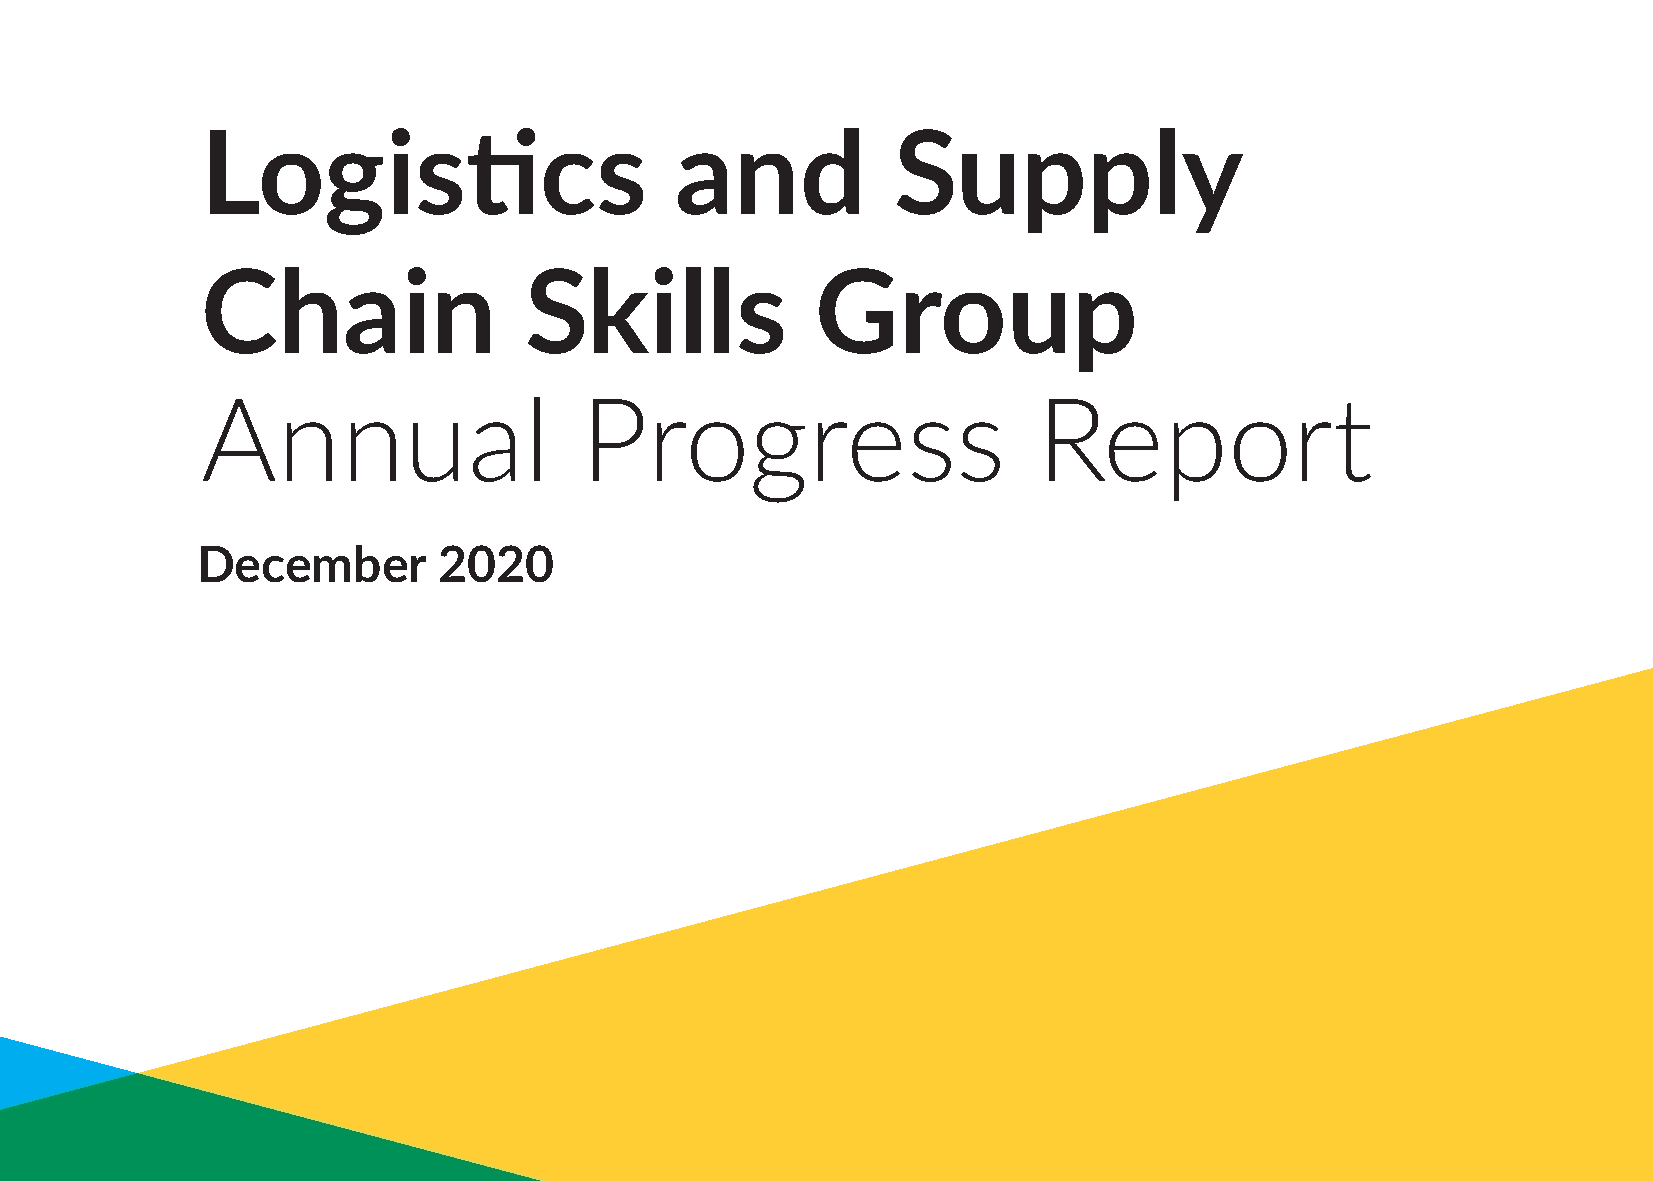 Description for First Progress Report of the Logistics and Supply Chain Skills Group